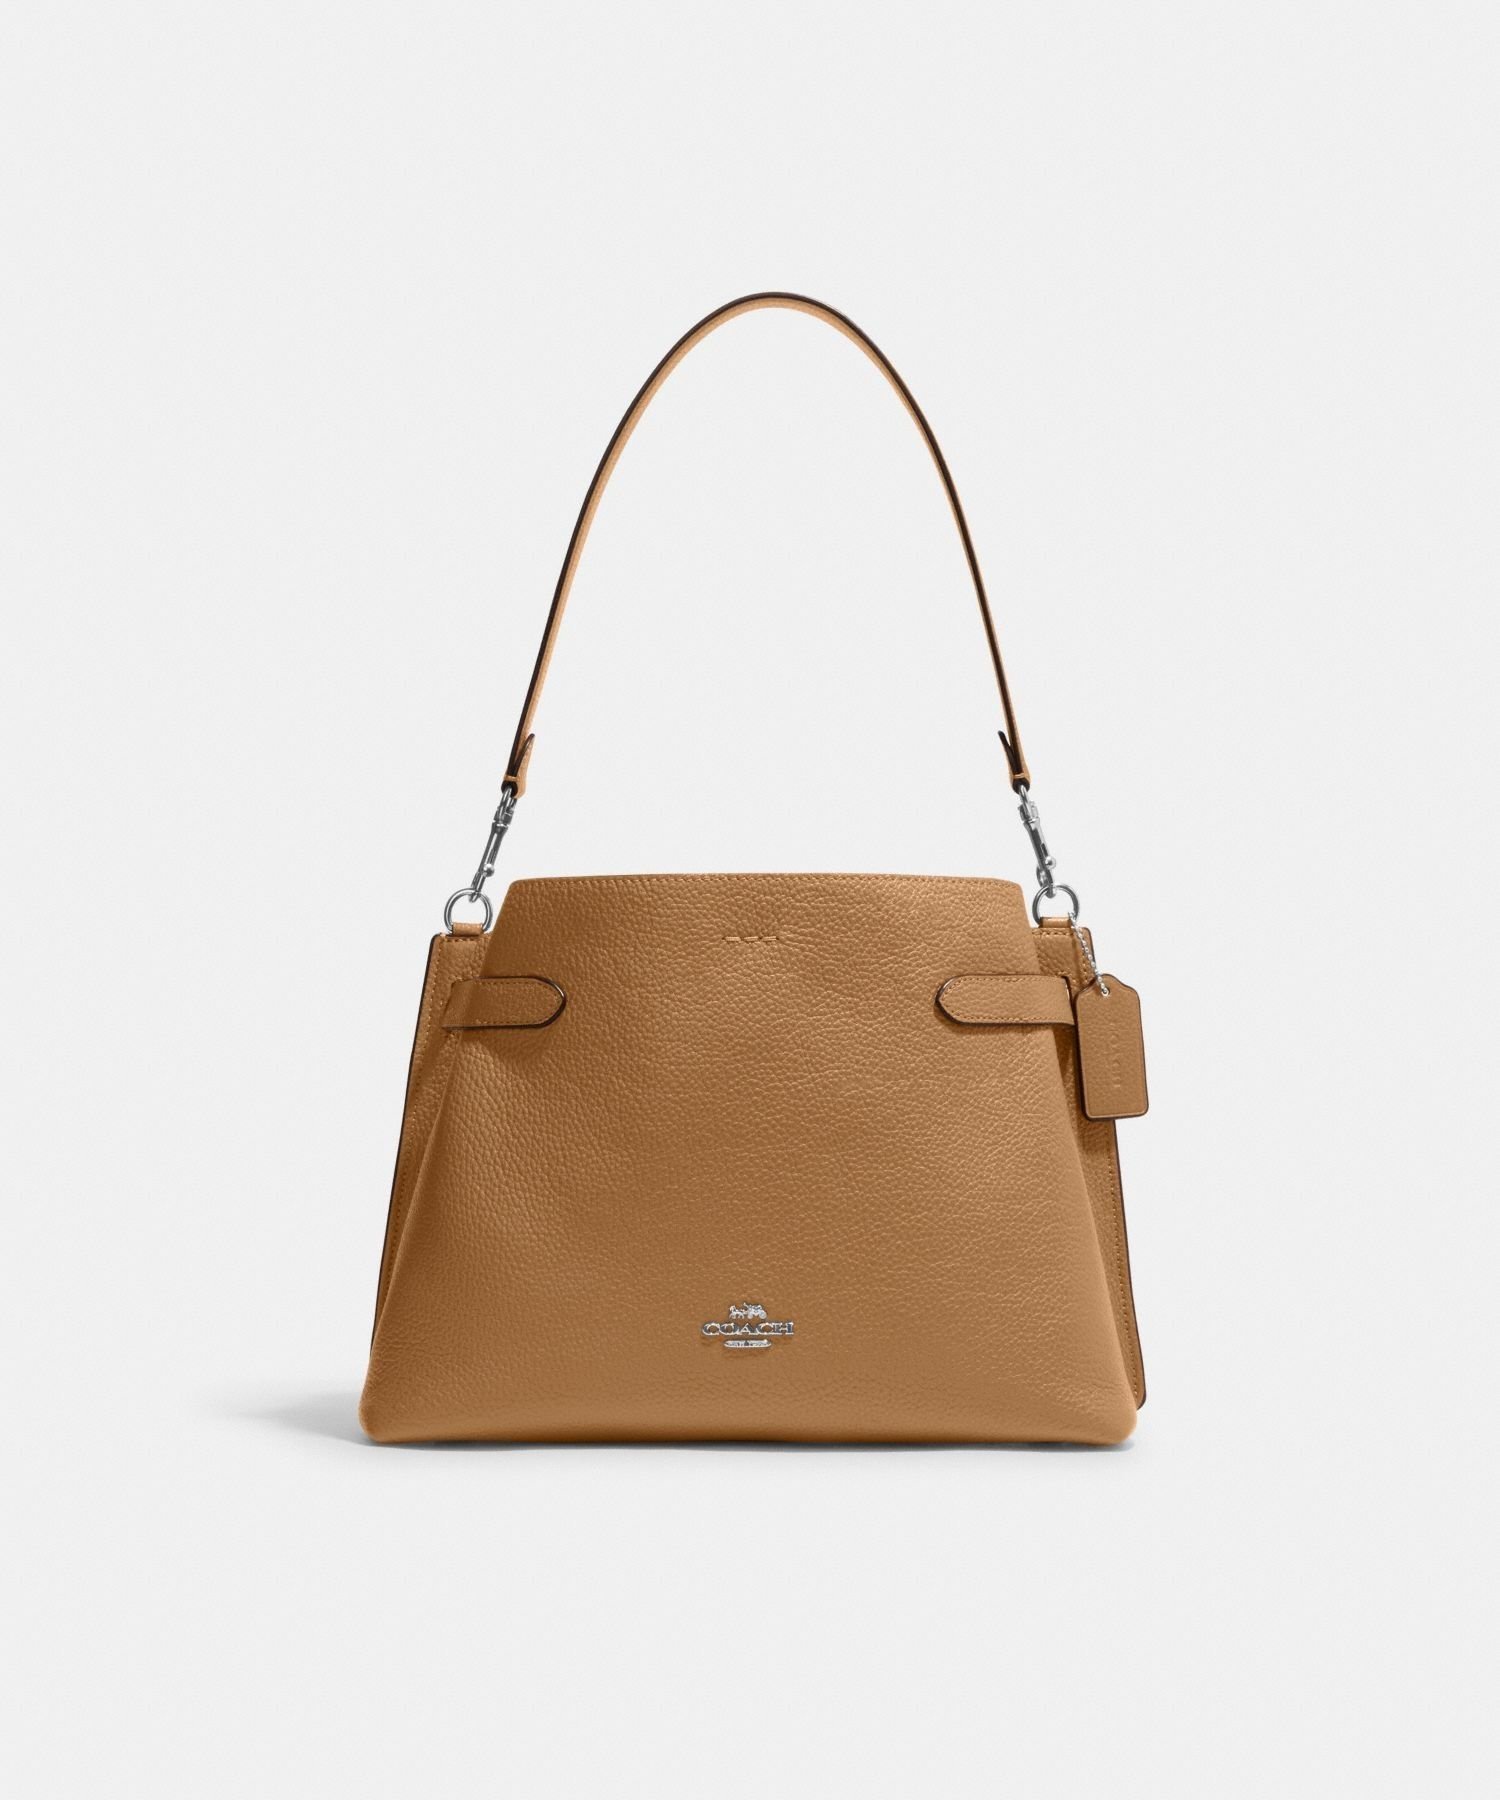 【SALE／62%OFF】COACH OUTLET ハンナ ショルダー バッグ コーチ　アウトレット バッグ ショルダーバッグ ブラウン【送料無料】